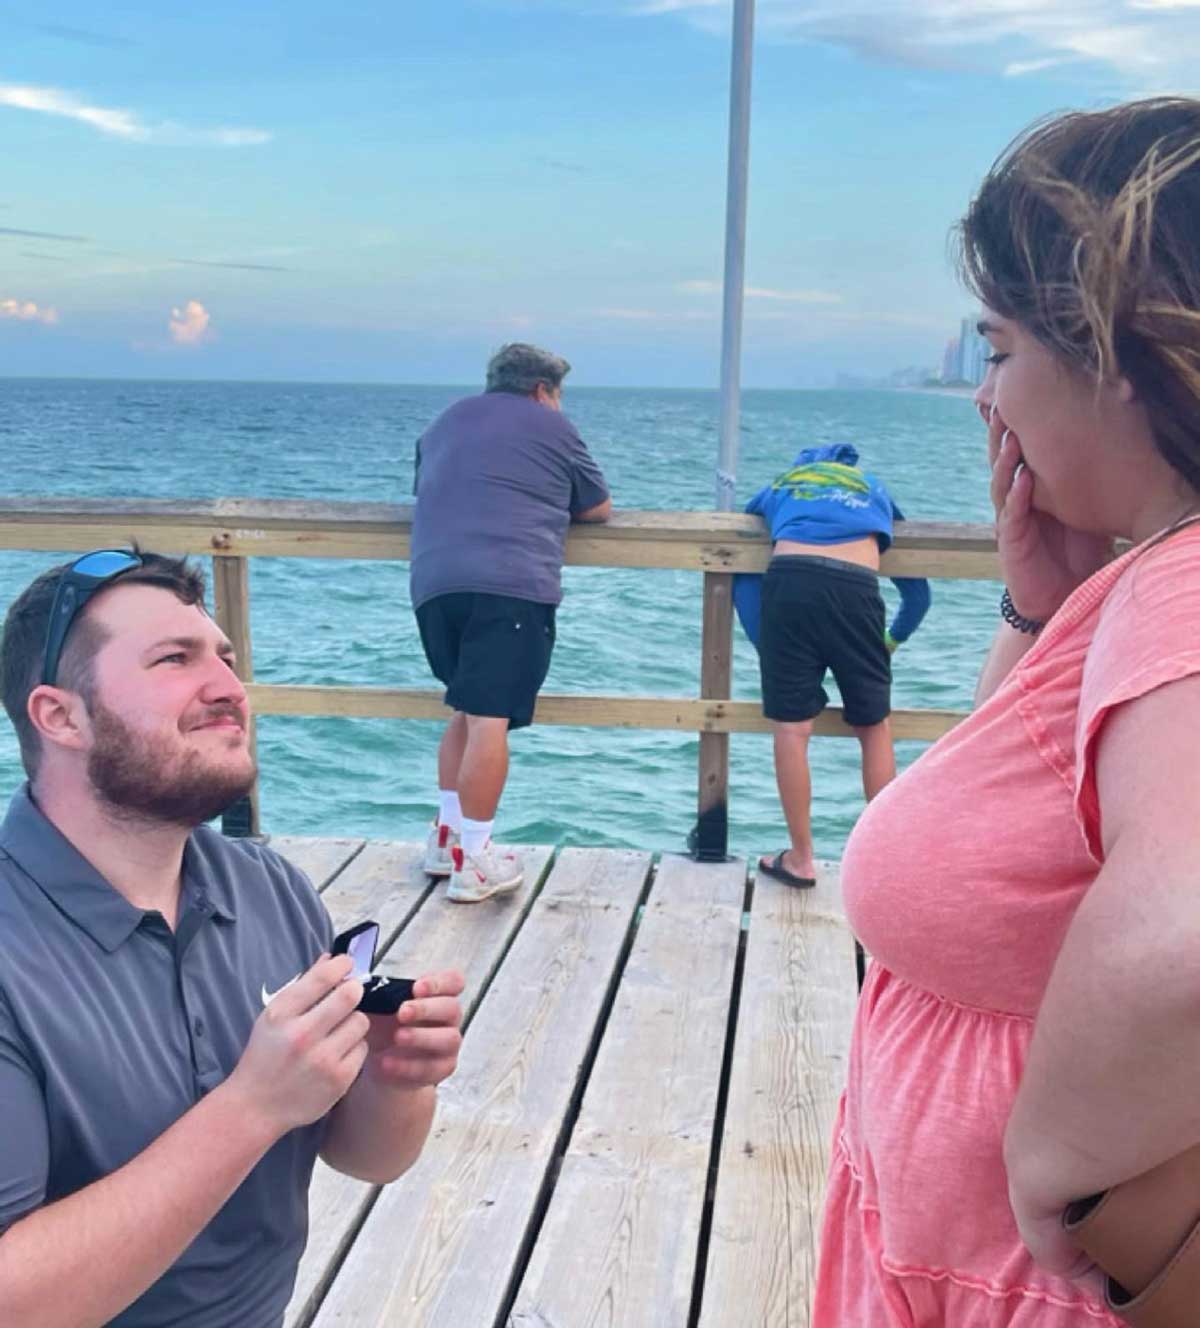 Proposed to my girlfriend yesterday and just noticed the guy in the back is not having a good time